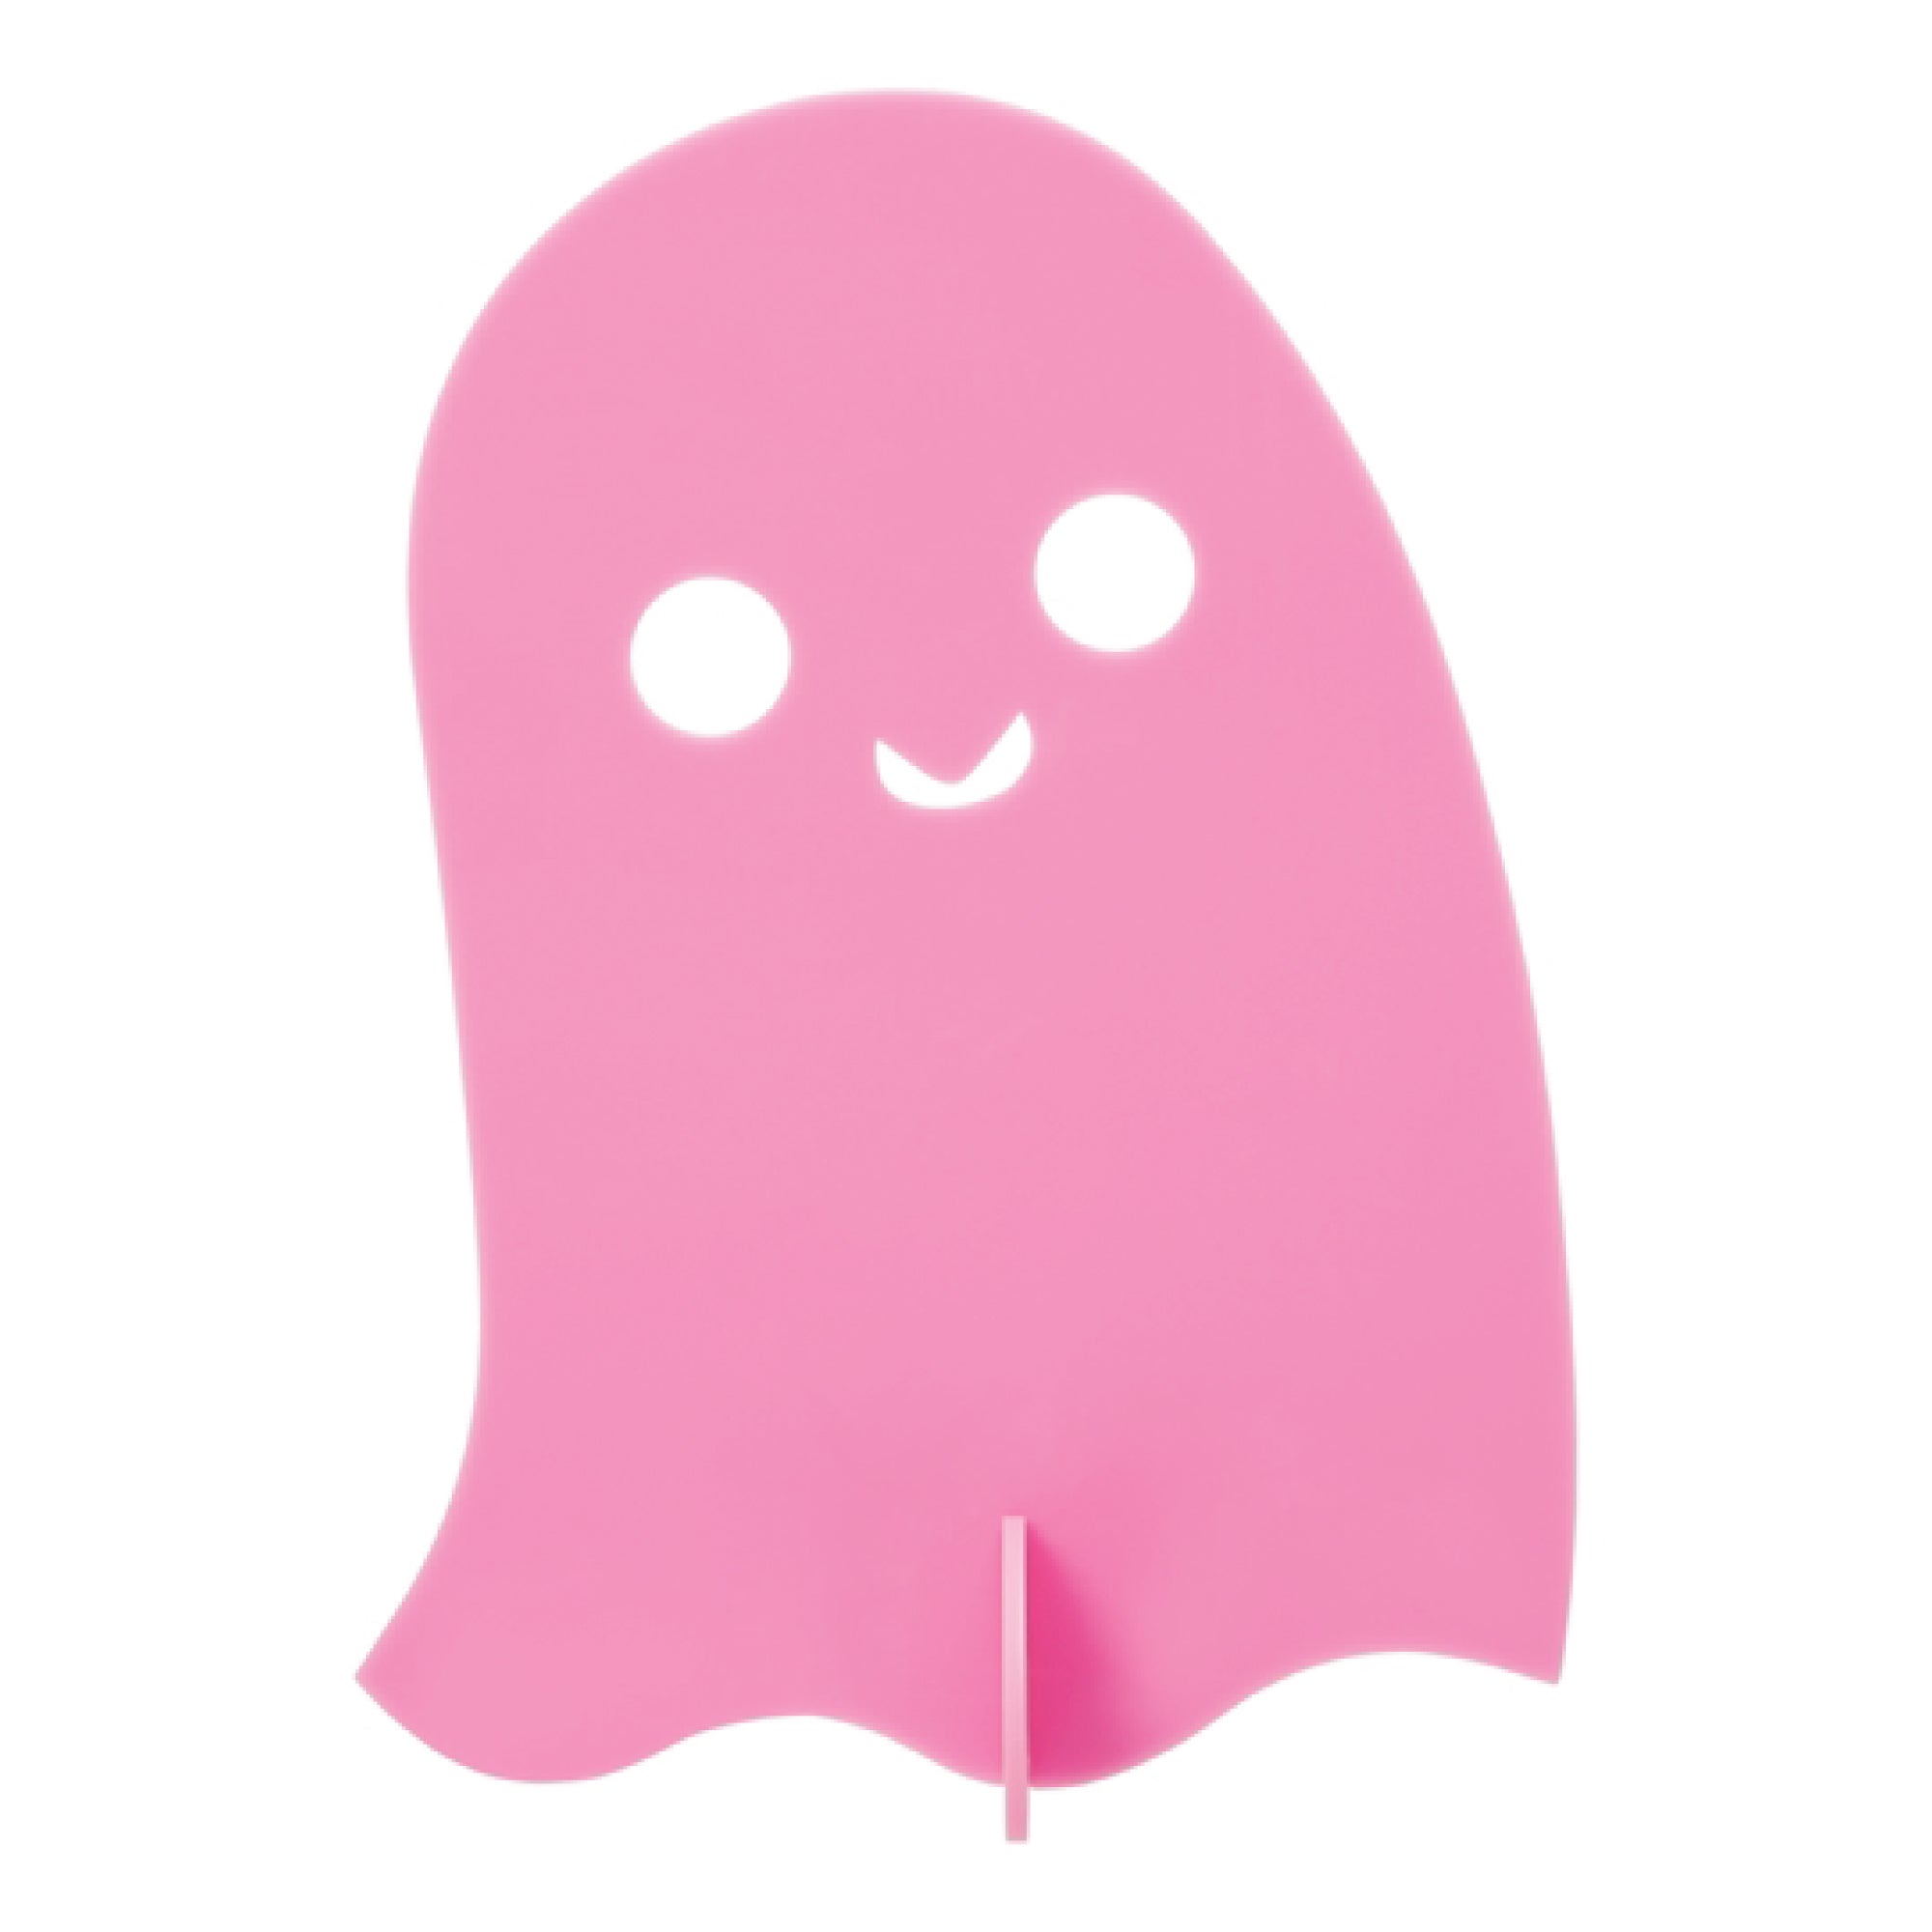 Pink Acrylic Ghost Decorations 3ct | The Party Darling